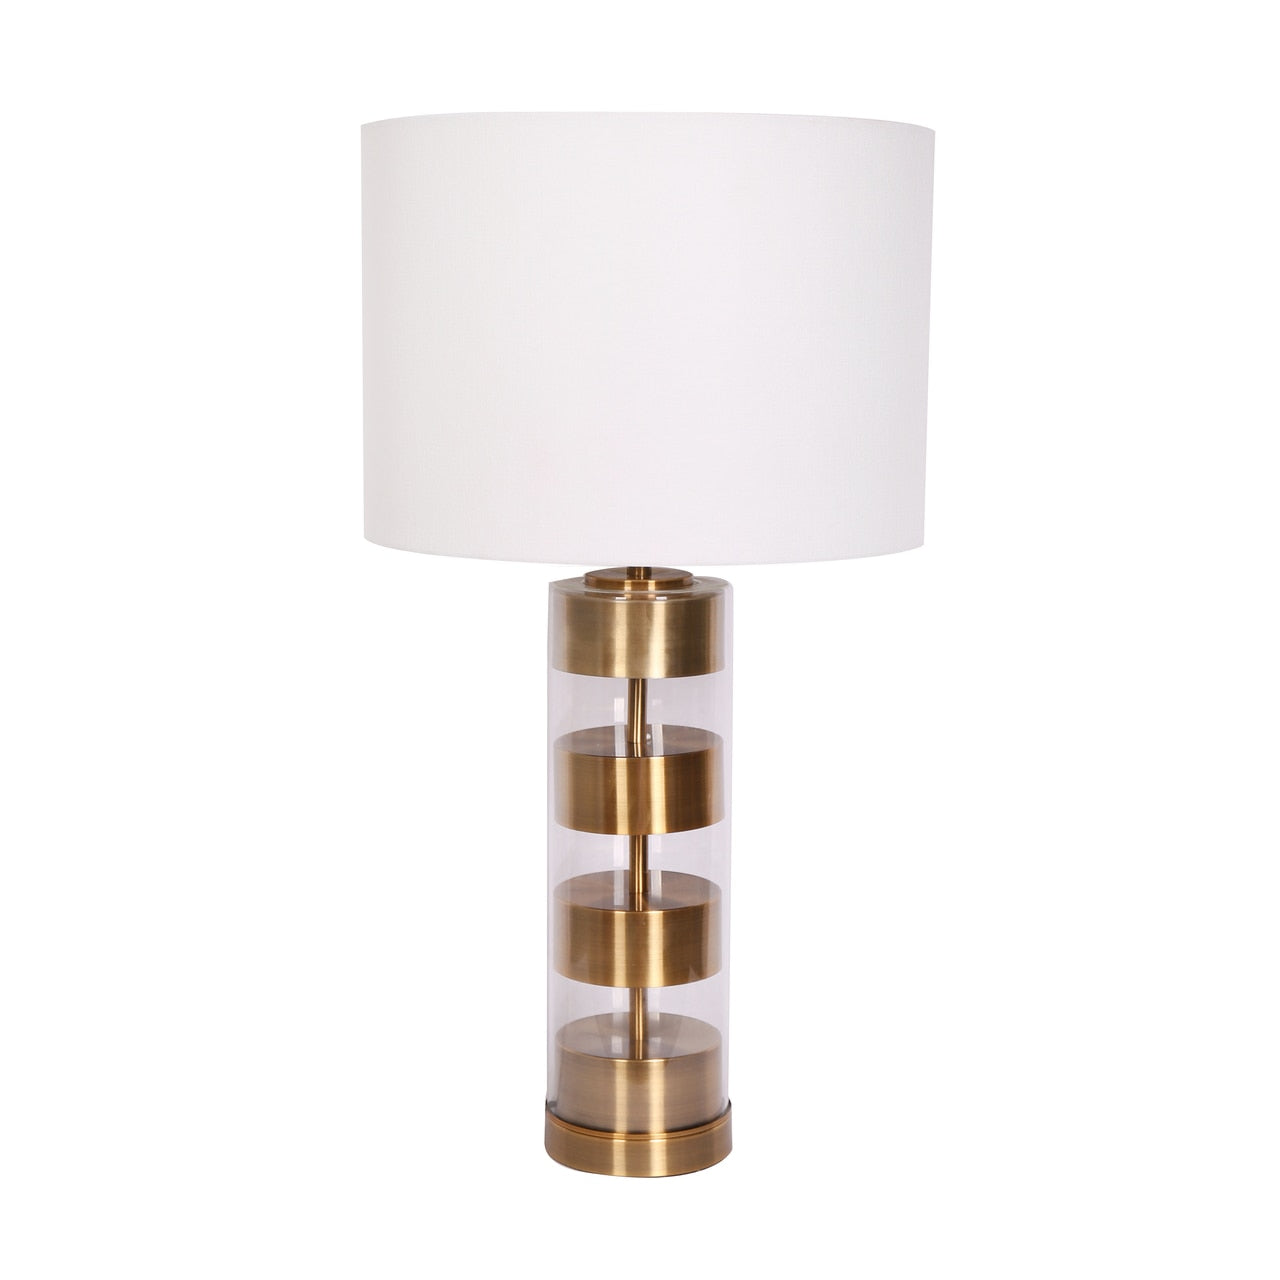 Glass Metal Cylinder Table Lamp - Gold